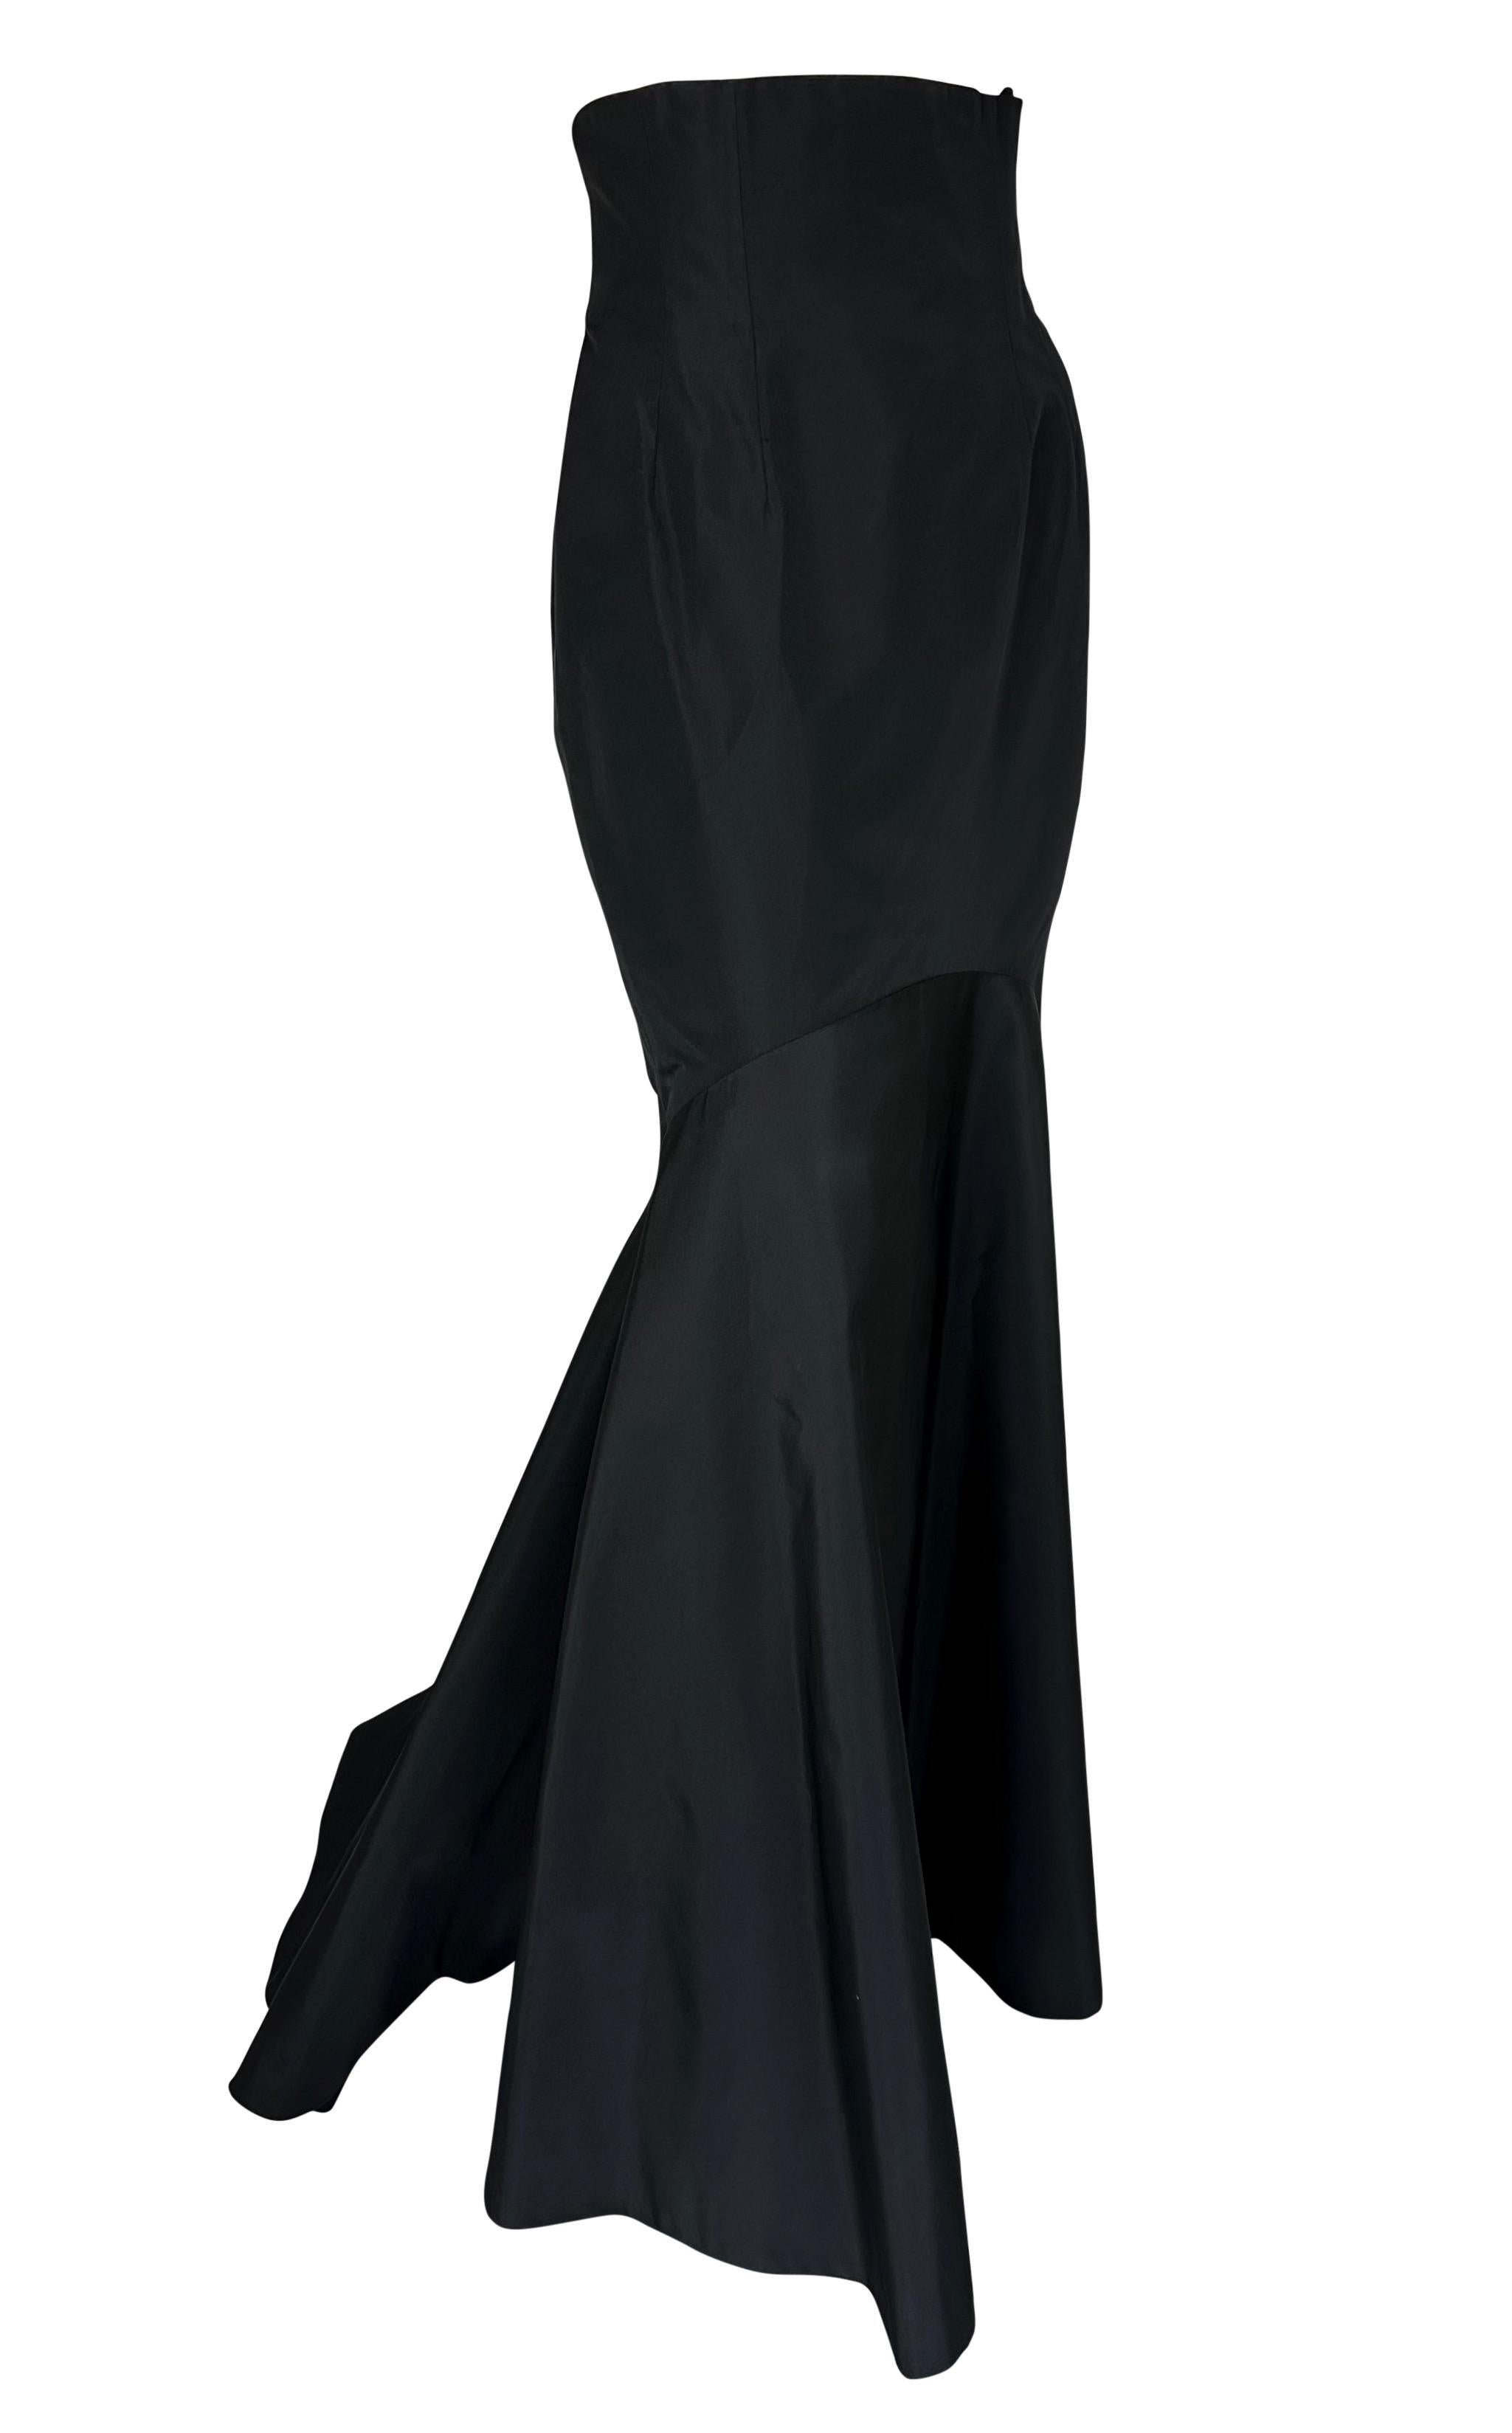 F/W 2000 Balmain Haute Couture by Oscar de la Renta Corset Flare Silk Skirt In Excellent Condition In West Hollywood, CA